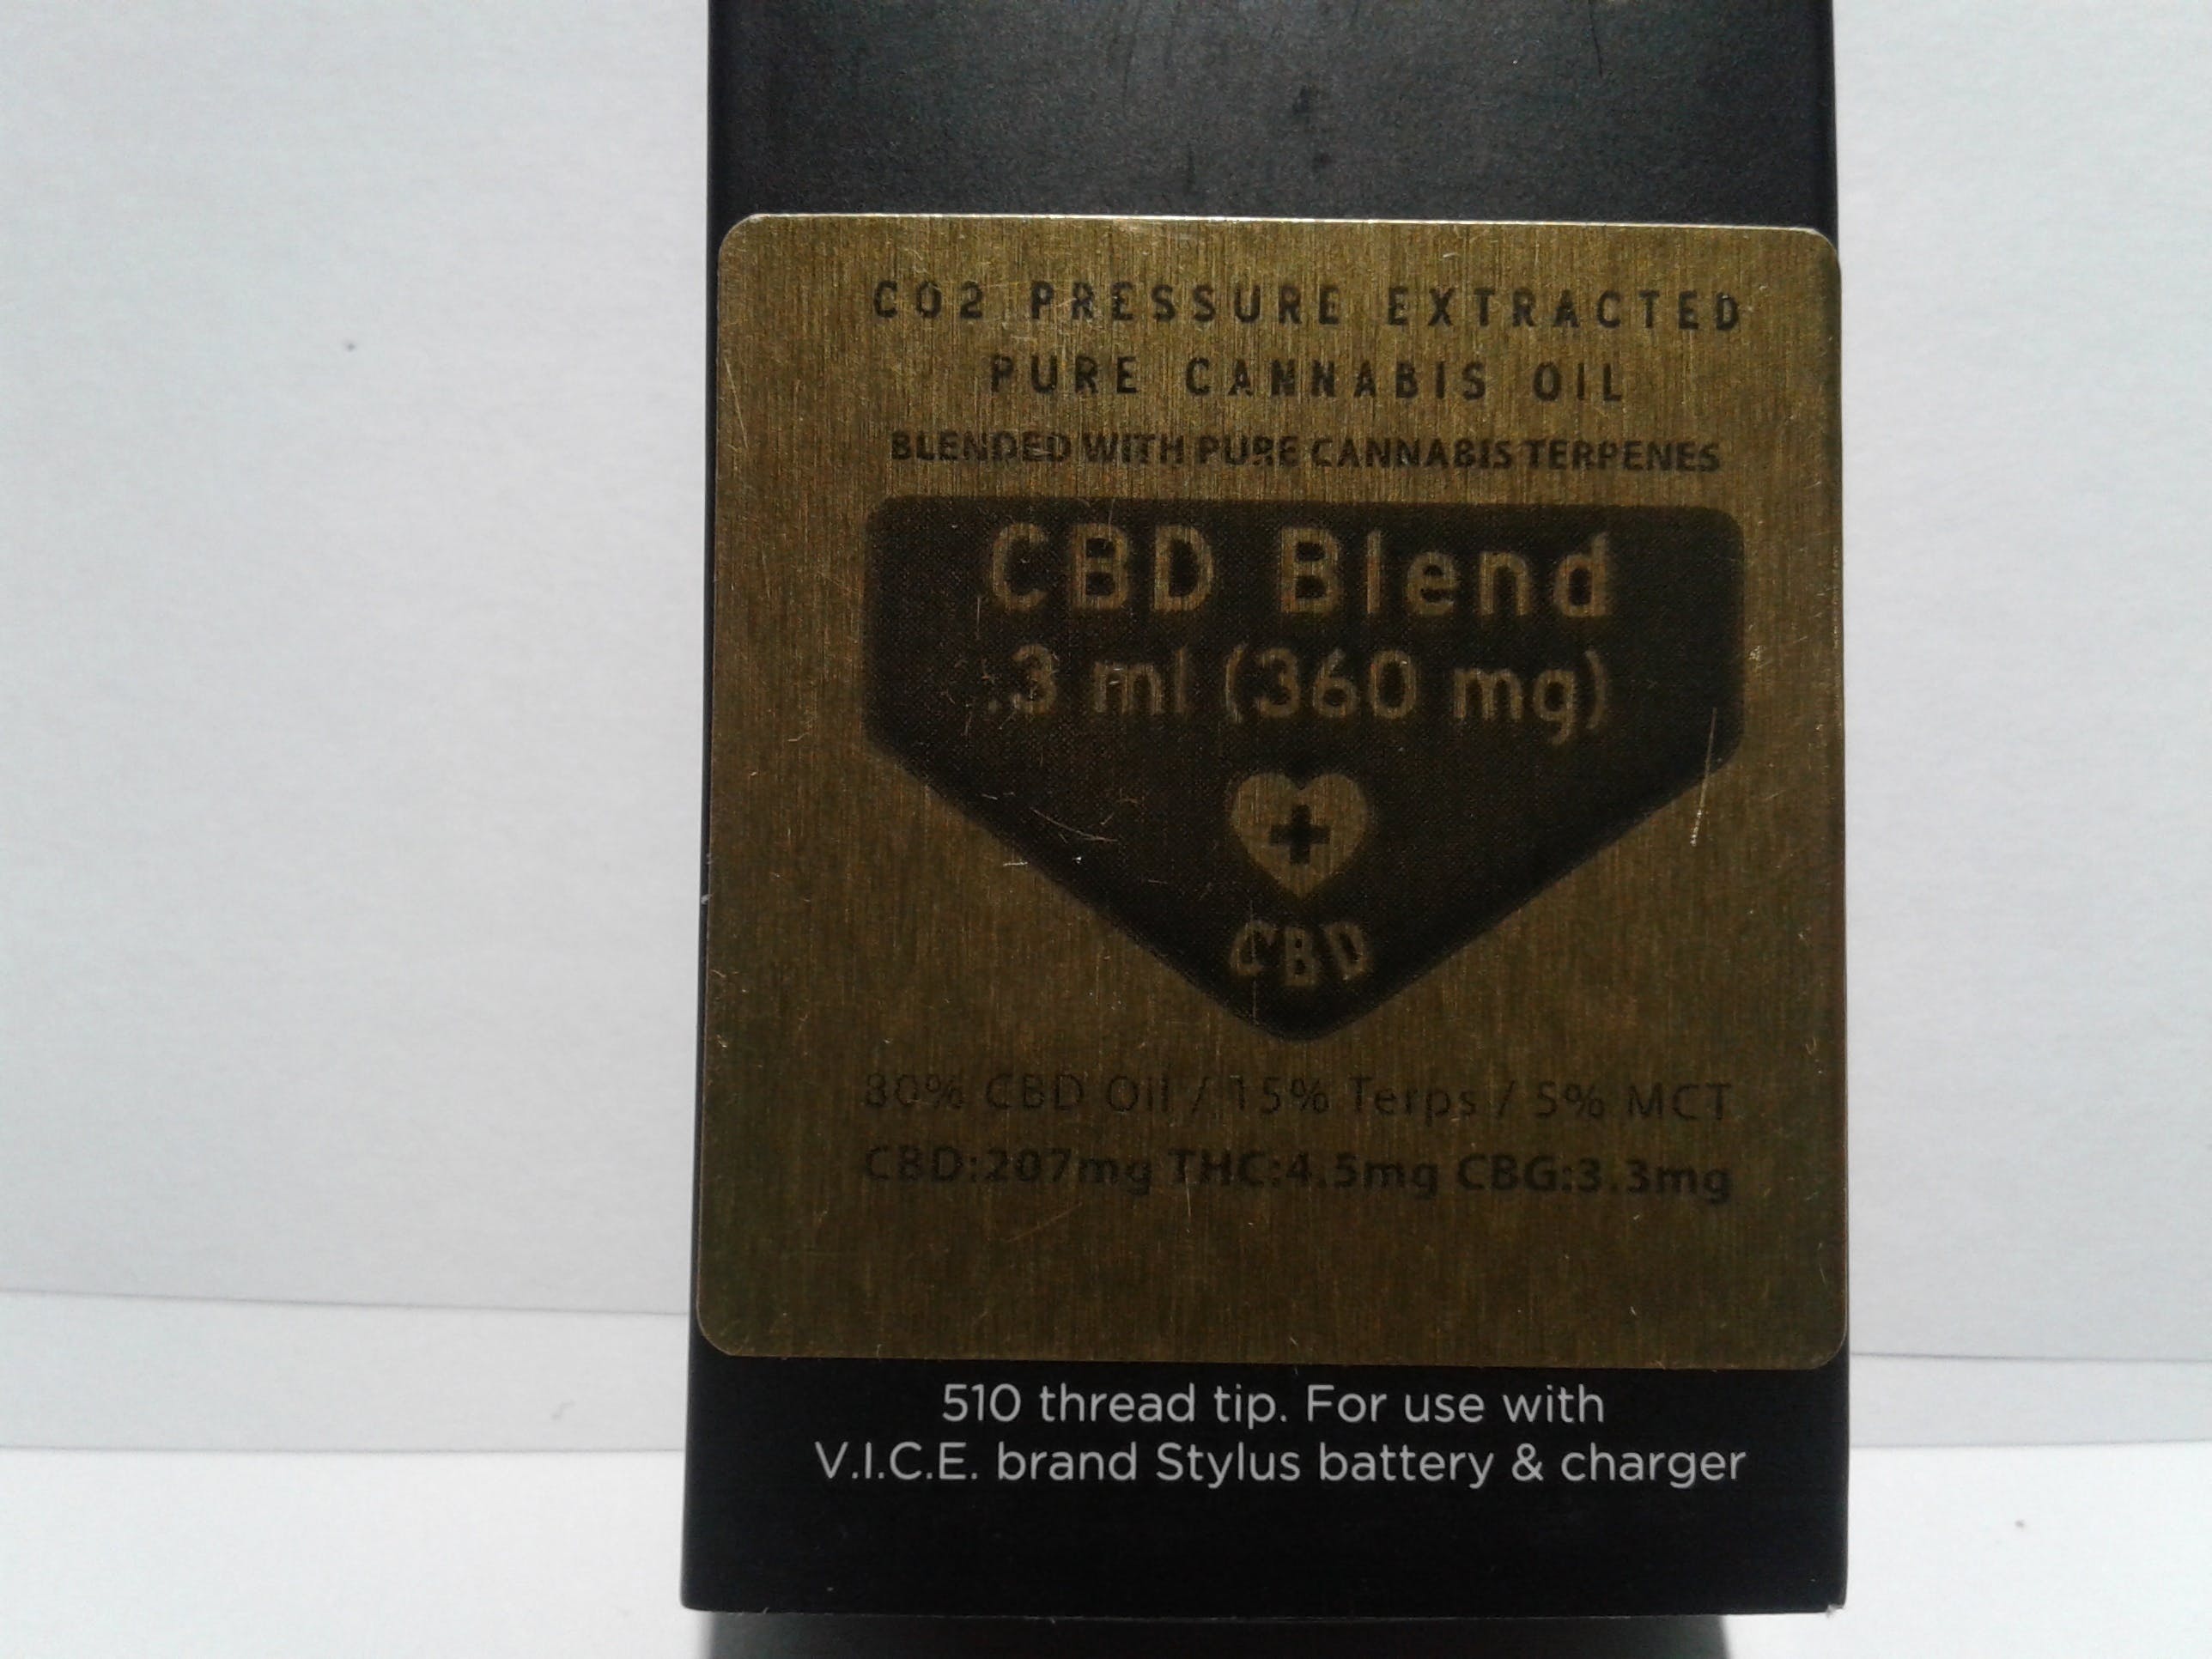 concentrate-cbd-blend-vancouver-island-cannabis-products